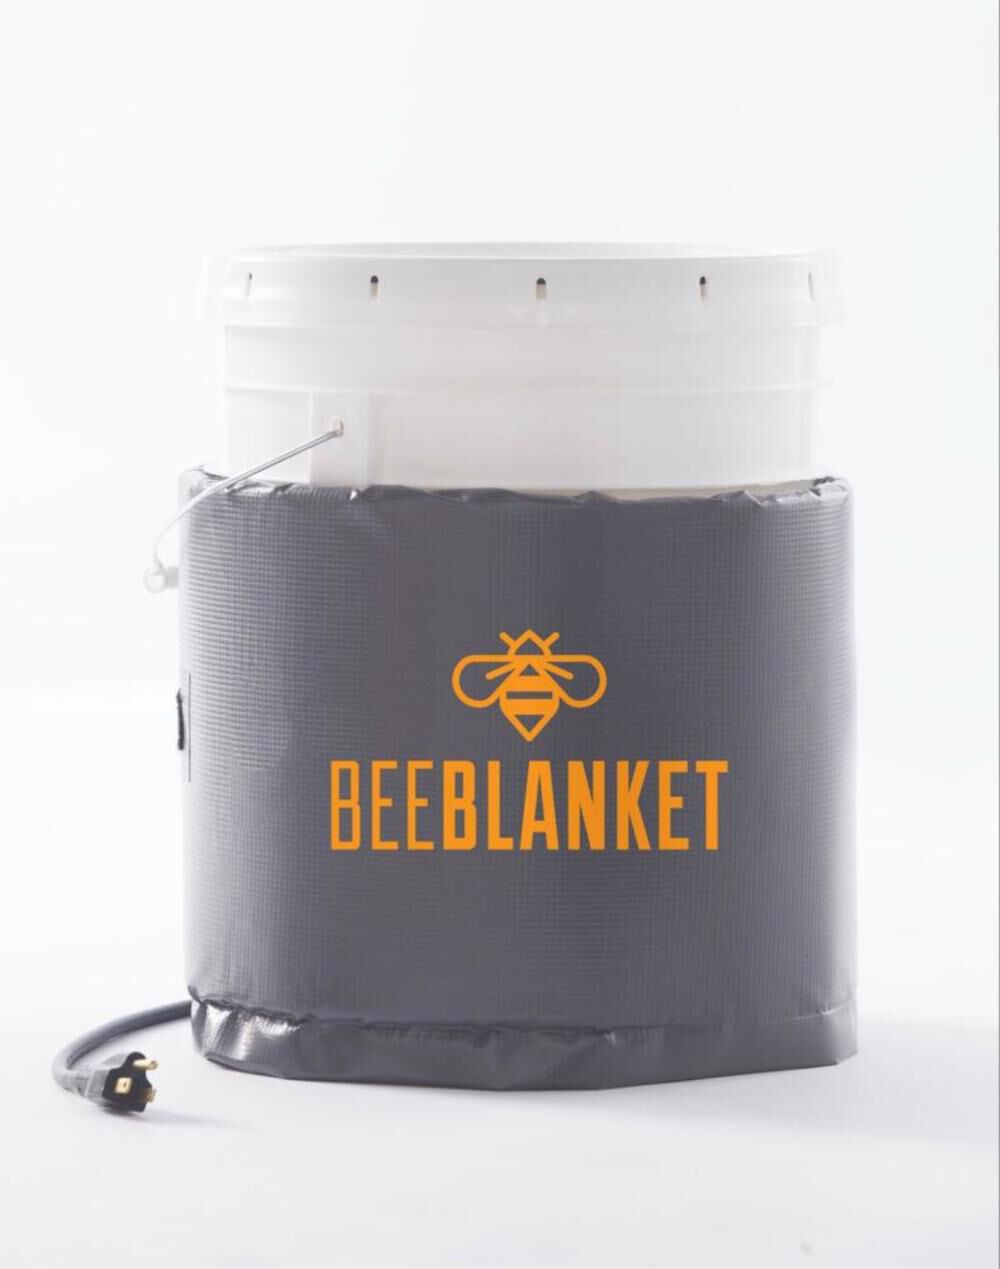 Bee Blanket 5-Gallon Insulated Pail Heater with Cutout for Gate Valve Fixed Thermostat 110 F BB05GV